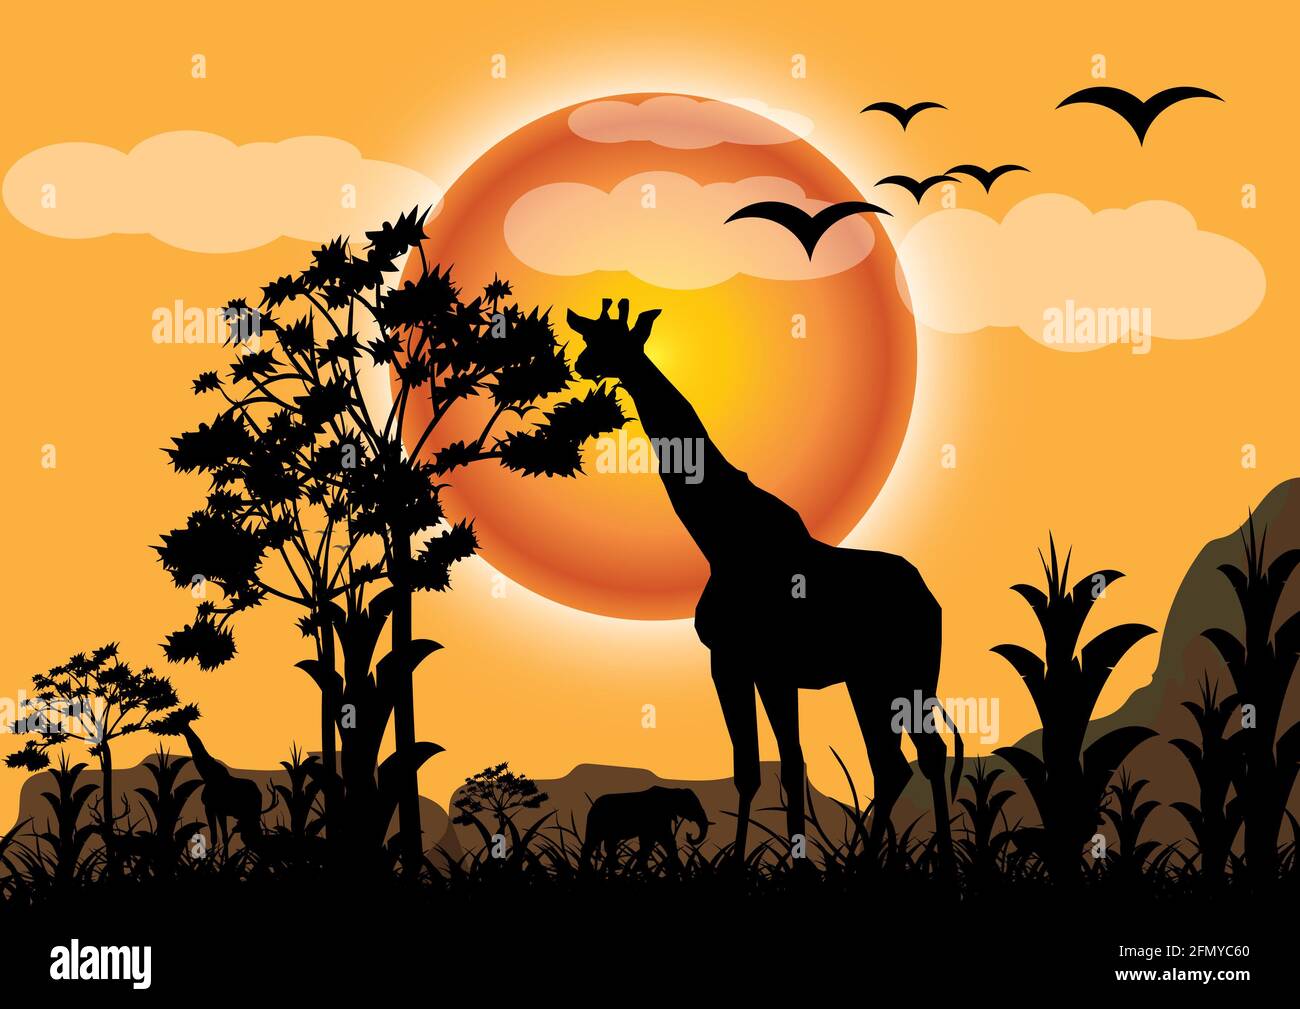 Giraffe in savannah on a shiny evening. high trees and  African elephants and other animals in the background. vector illustrator Stock Photo